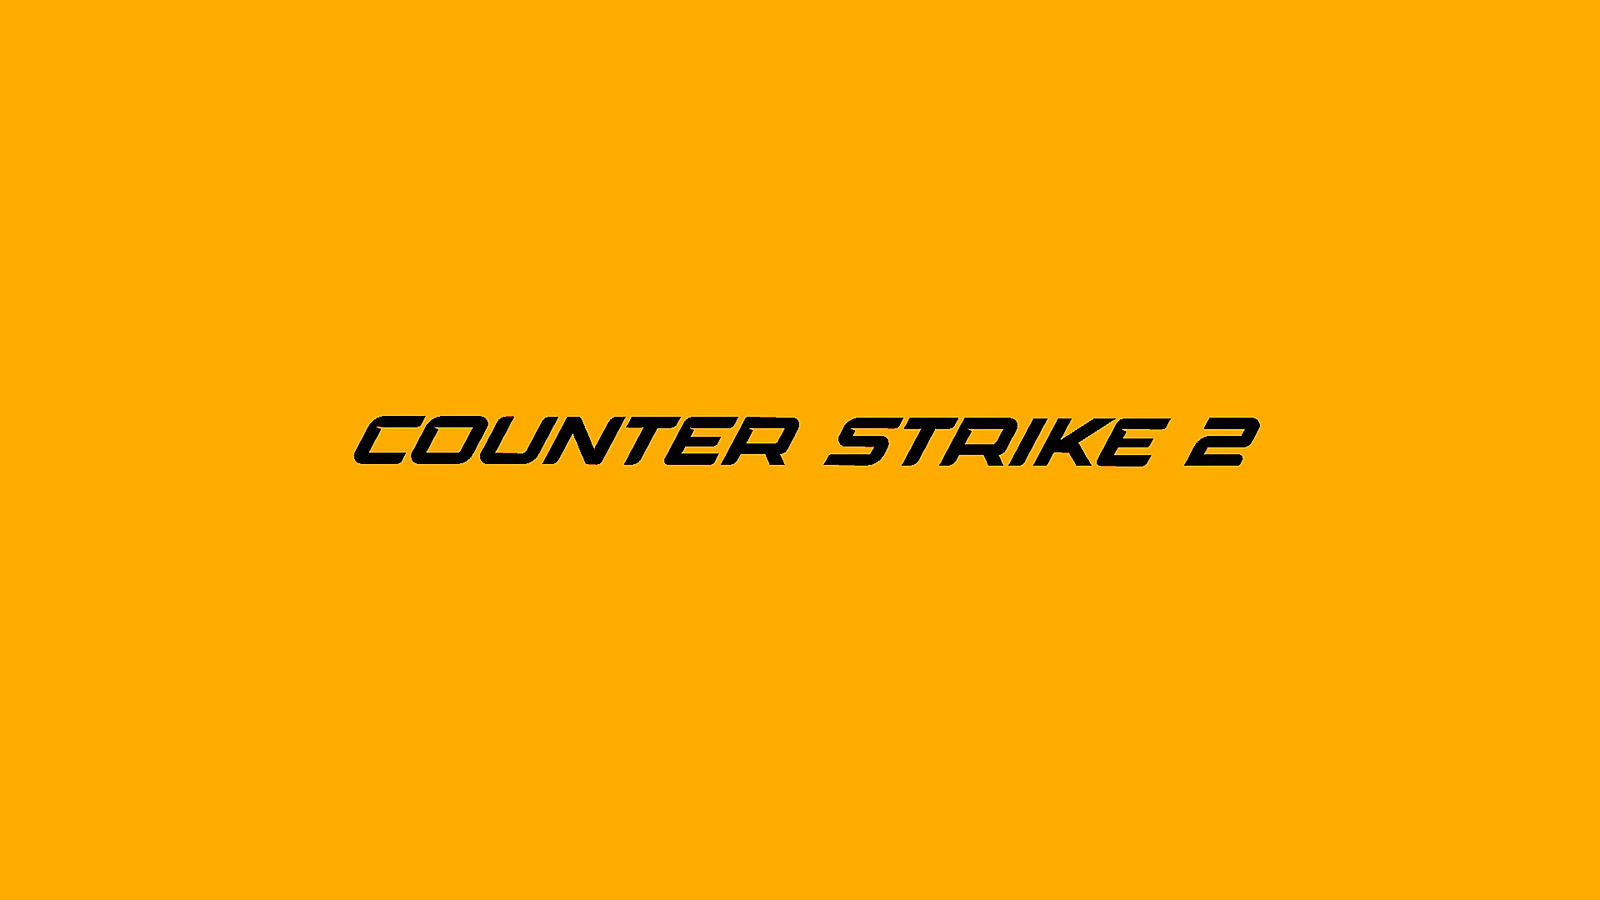 Is Counter-Strike 2 Free To Play On Steam?